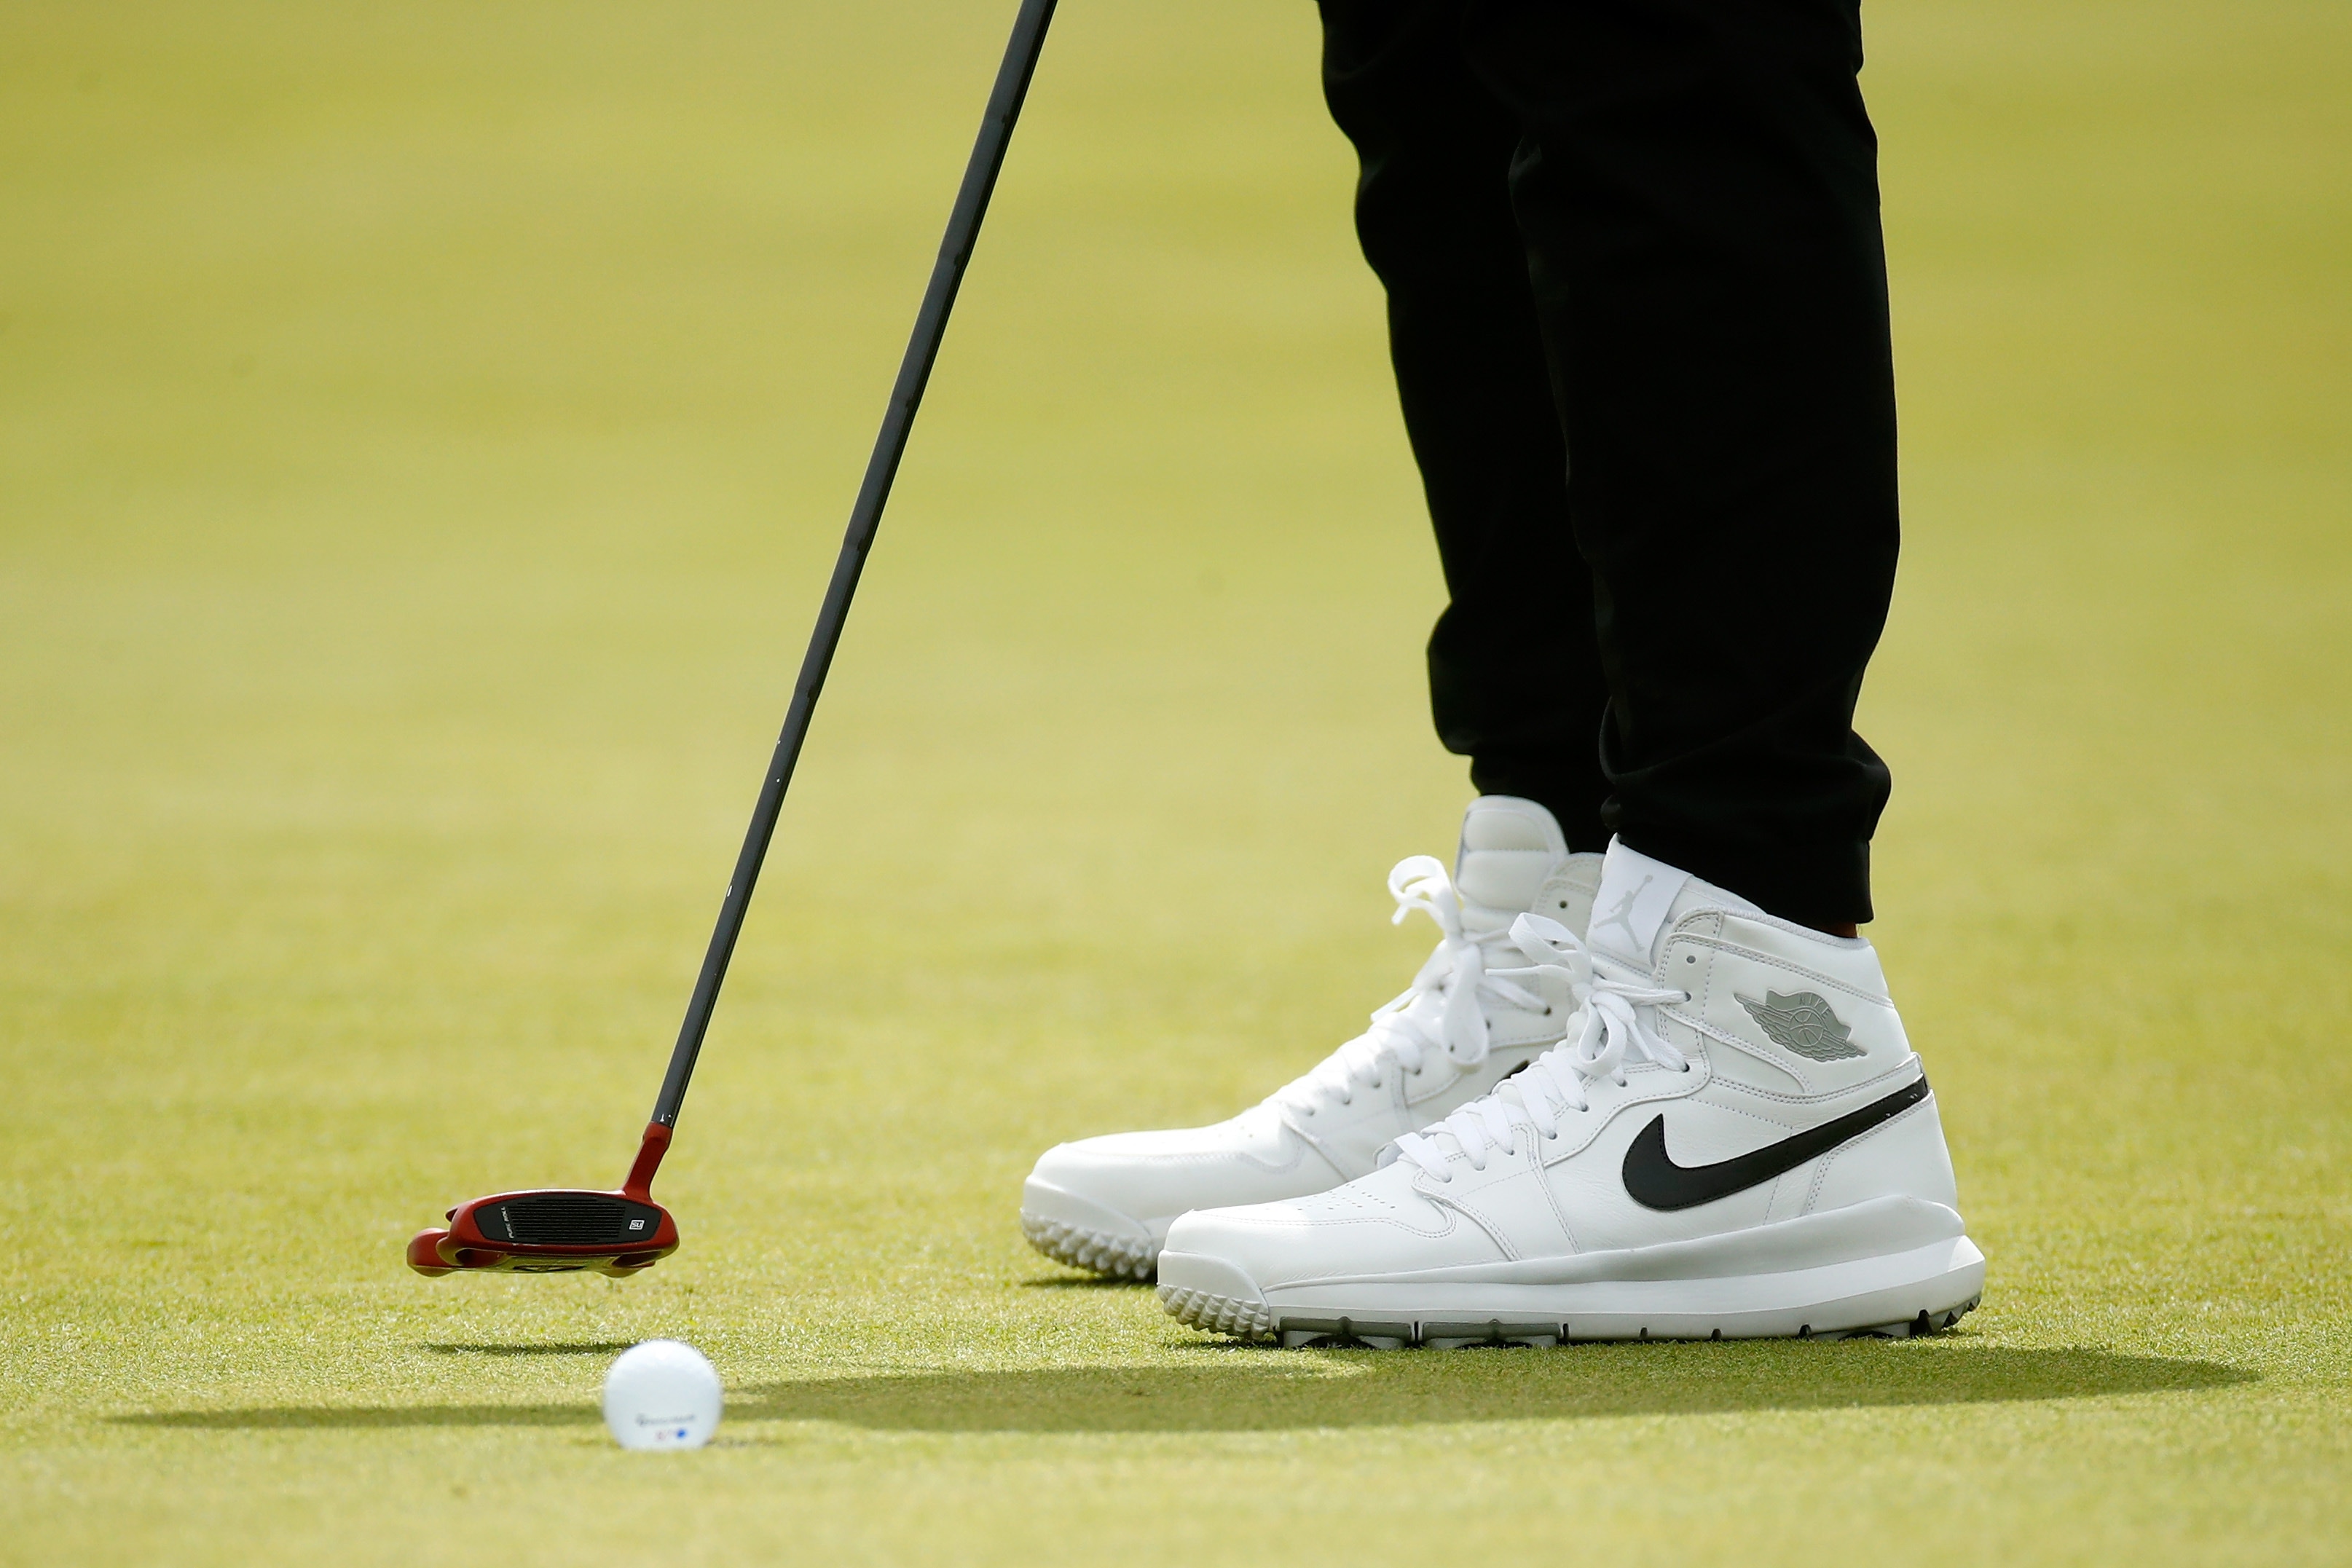 coolest nike golf shoes